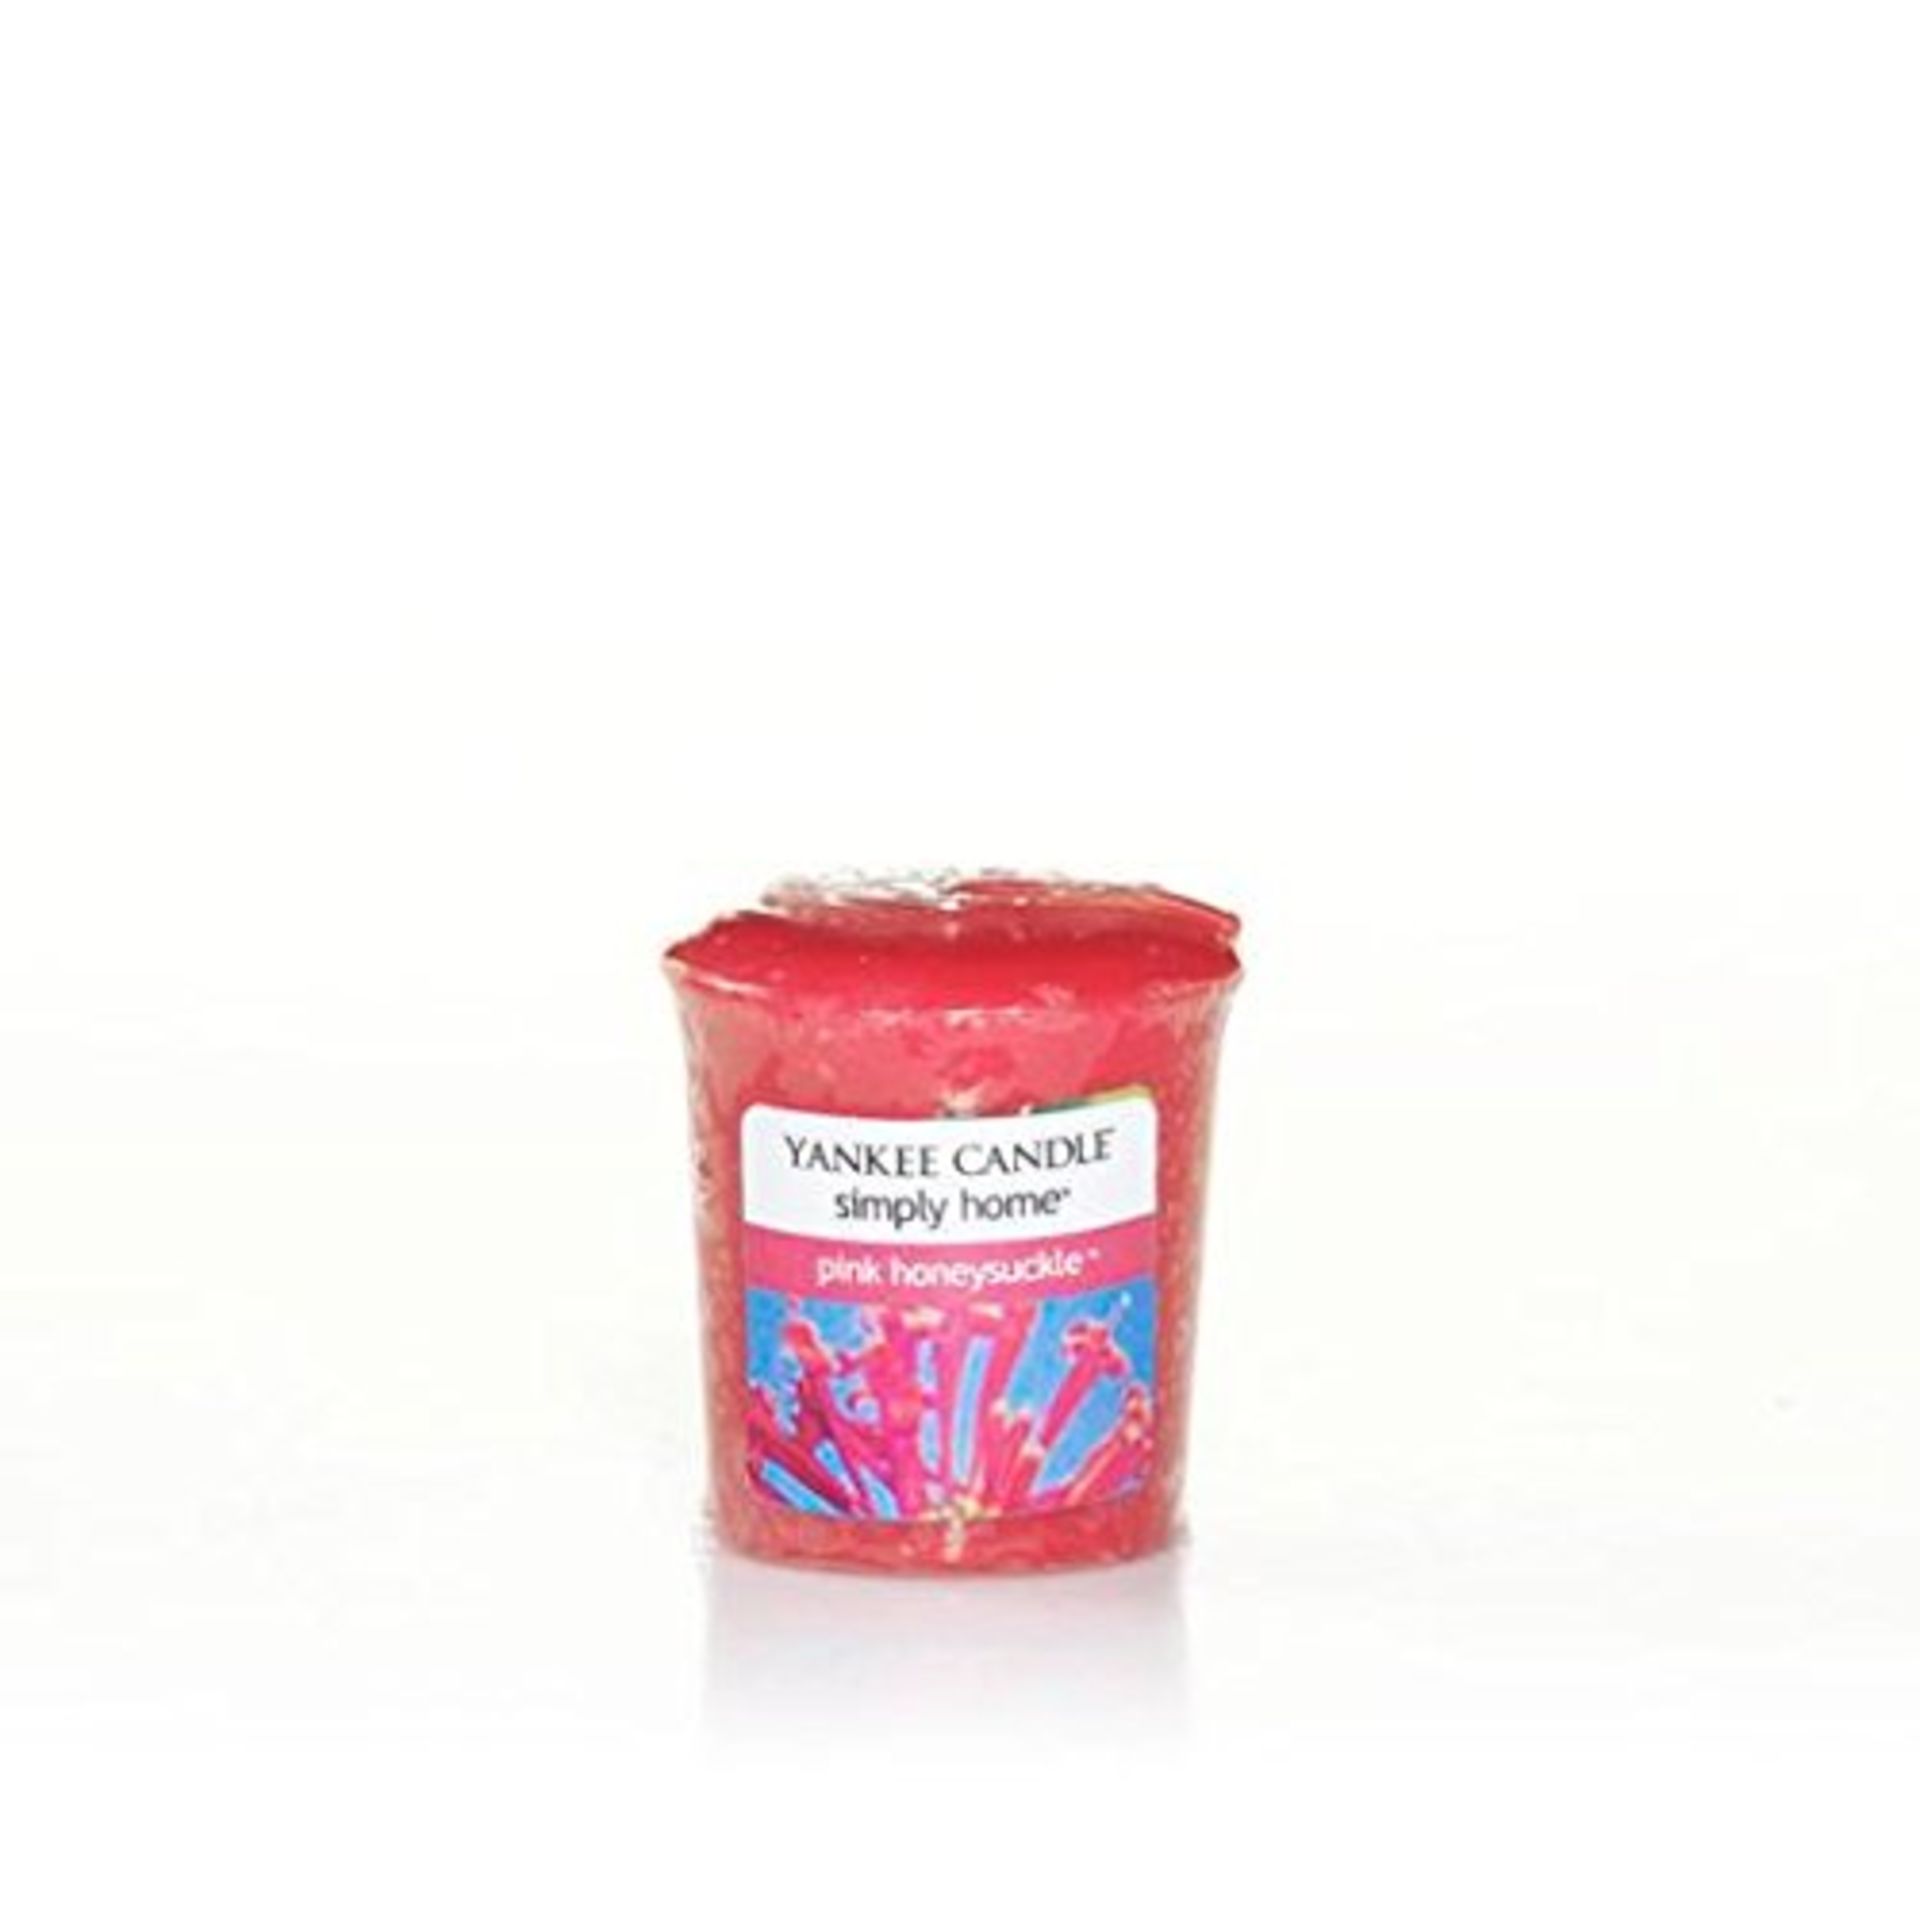 V *TRADE QTY* Brand New 18 x Yankee Candle Votive Pink Honeysuckle 49g Amazon Price £71.10 X 5 - Image 2 of 2